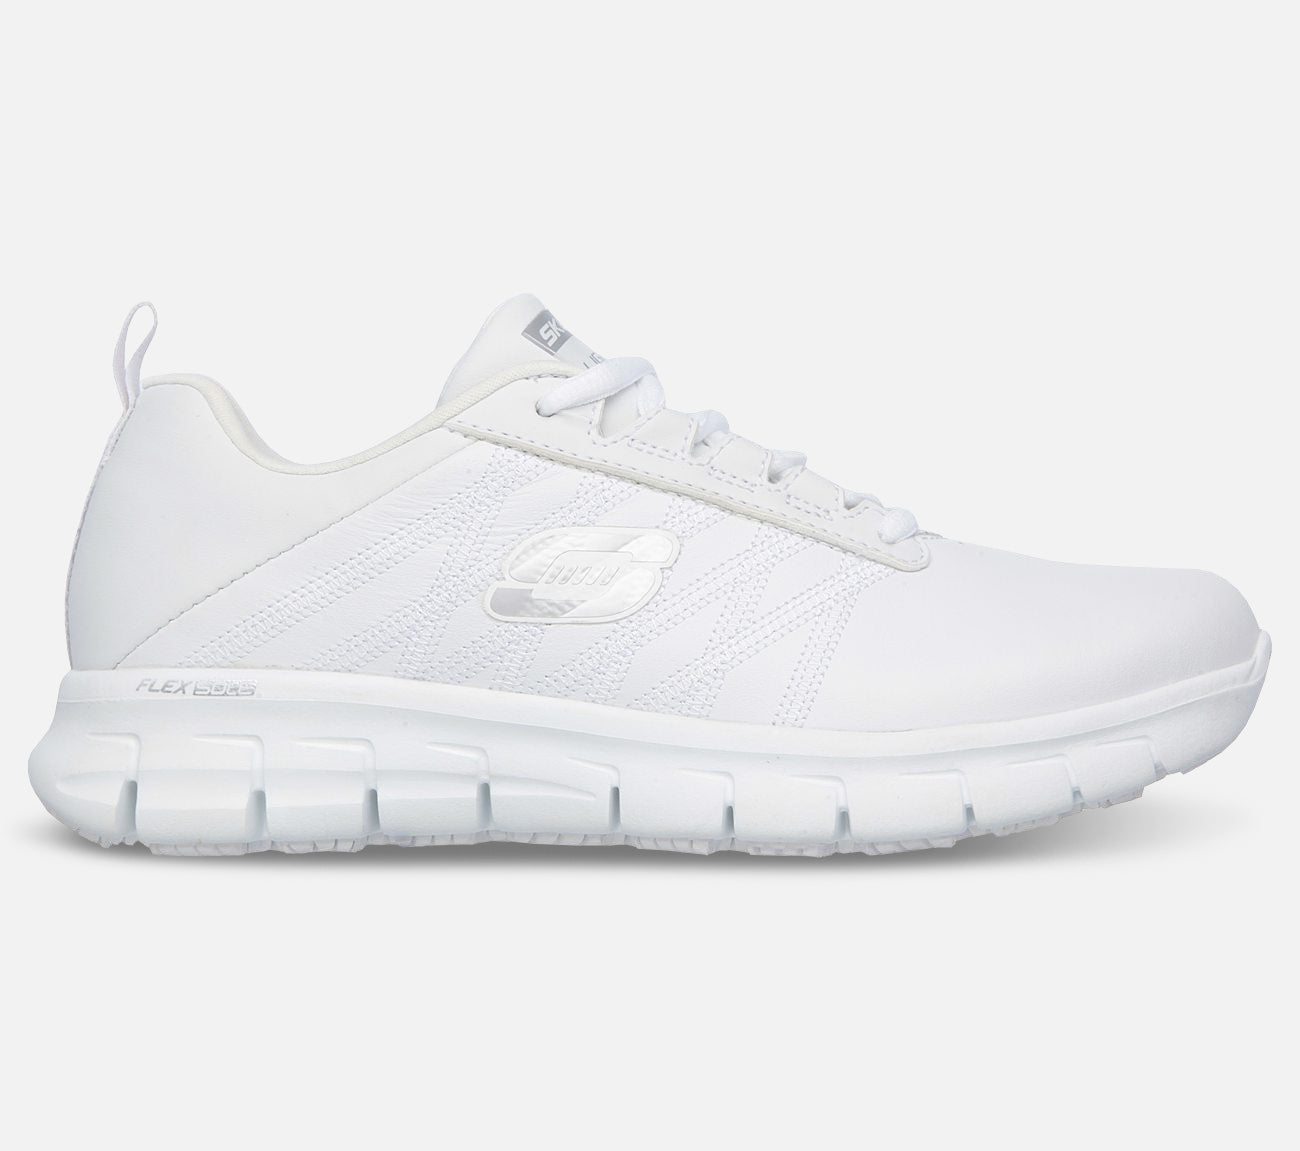 Relaxed Fit: Work - Sure Track Work Skechers